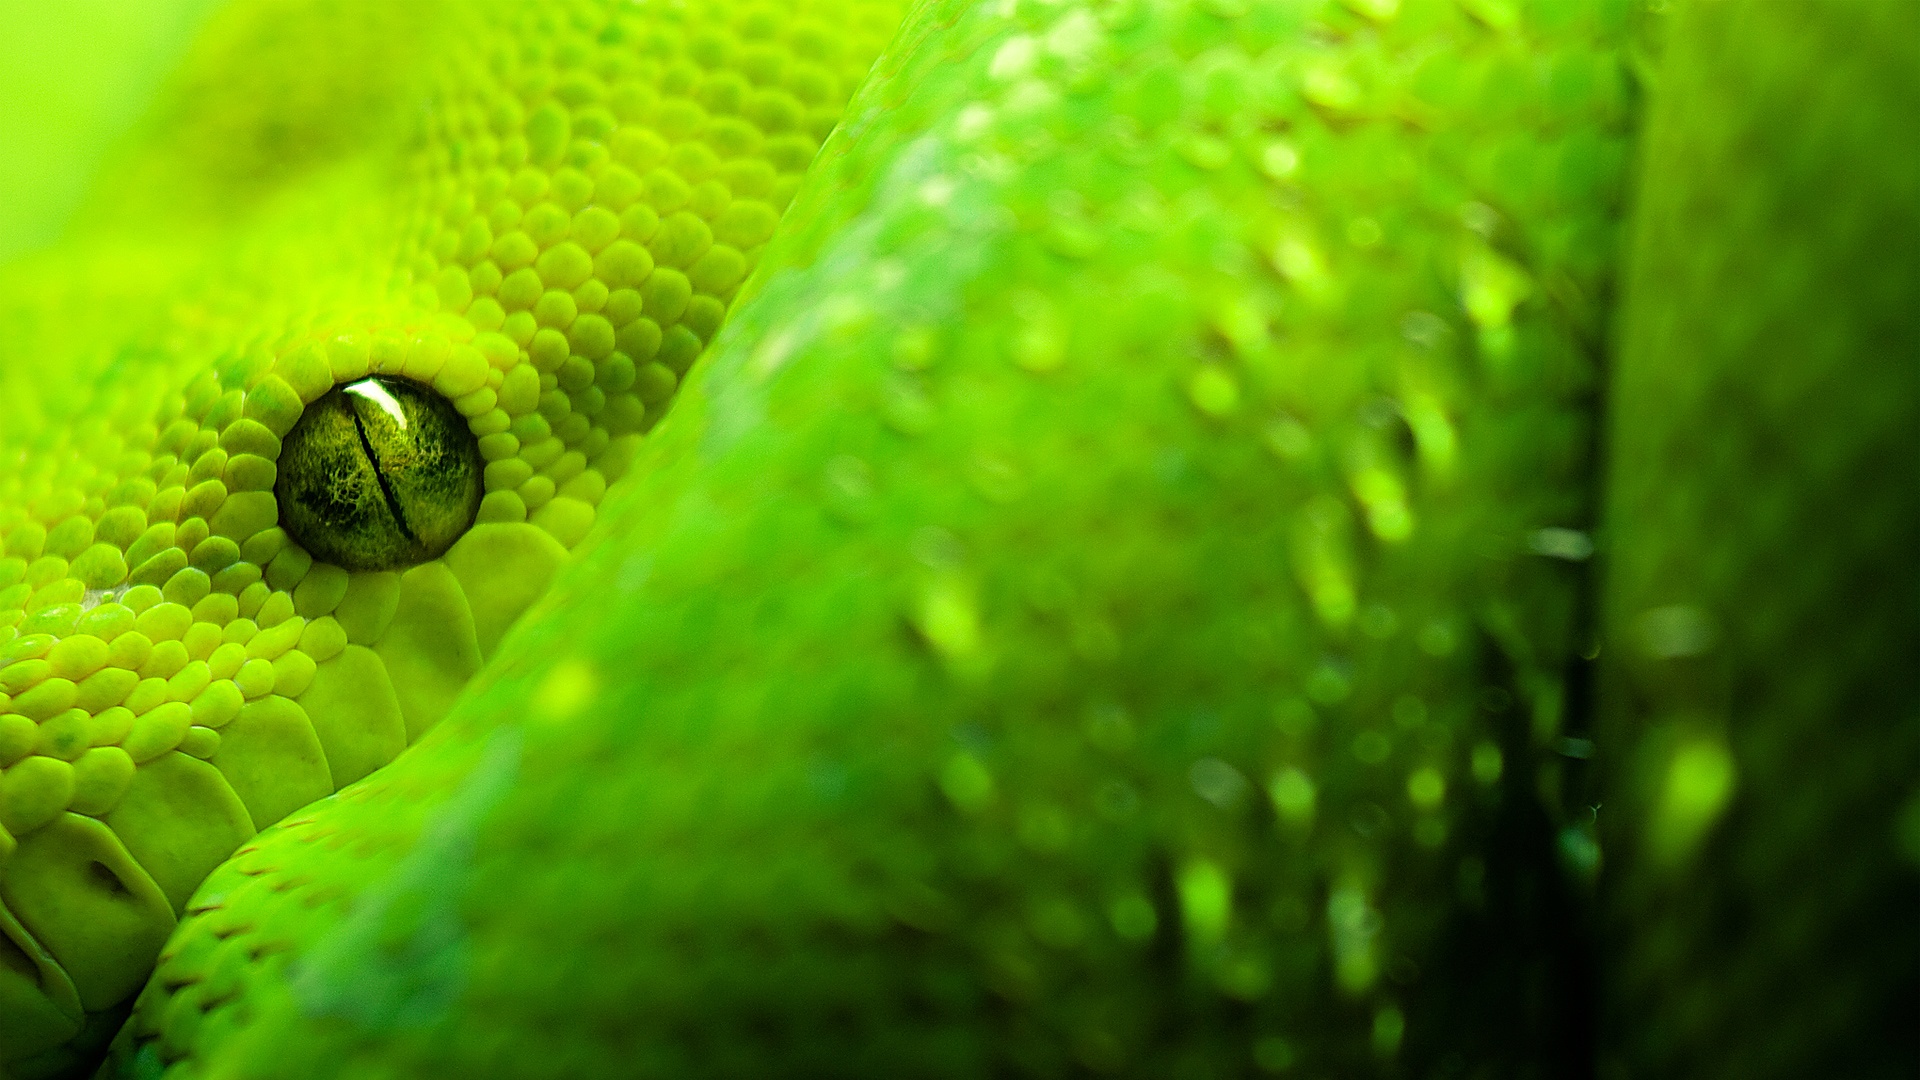 Wallpaper Snake Animated Background Viper Allure Ps3 Green